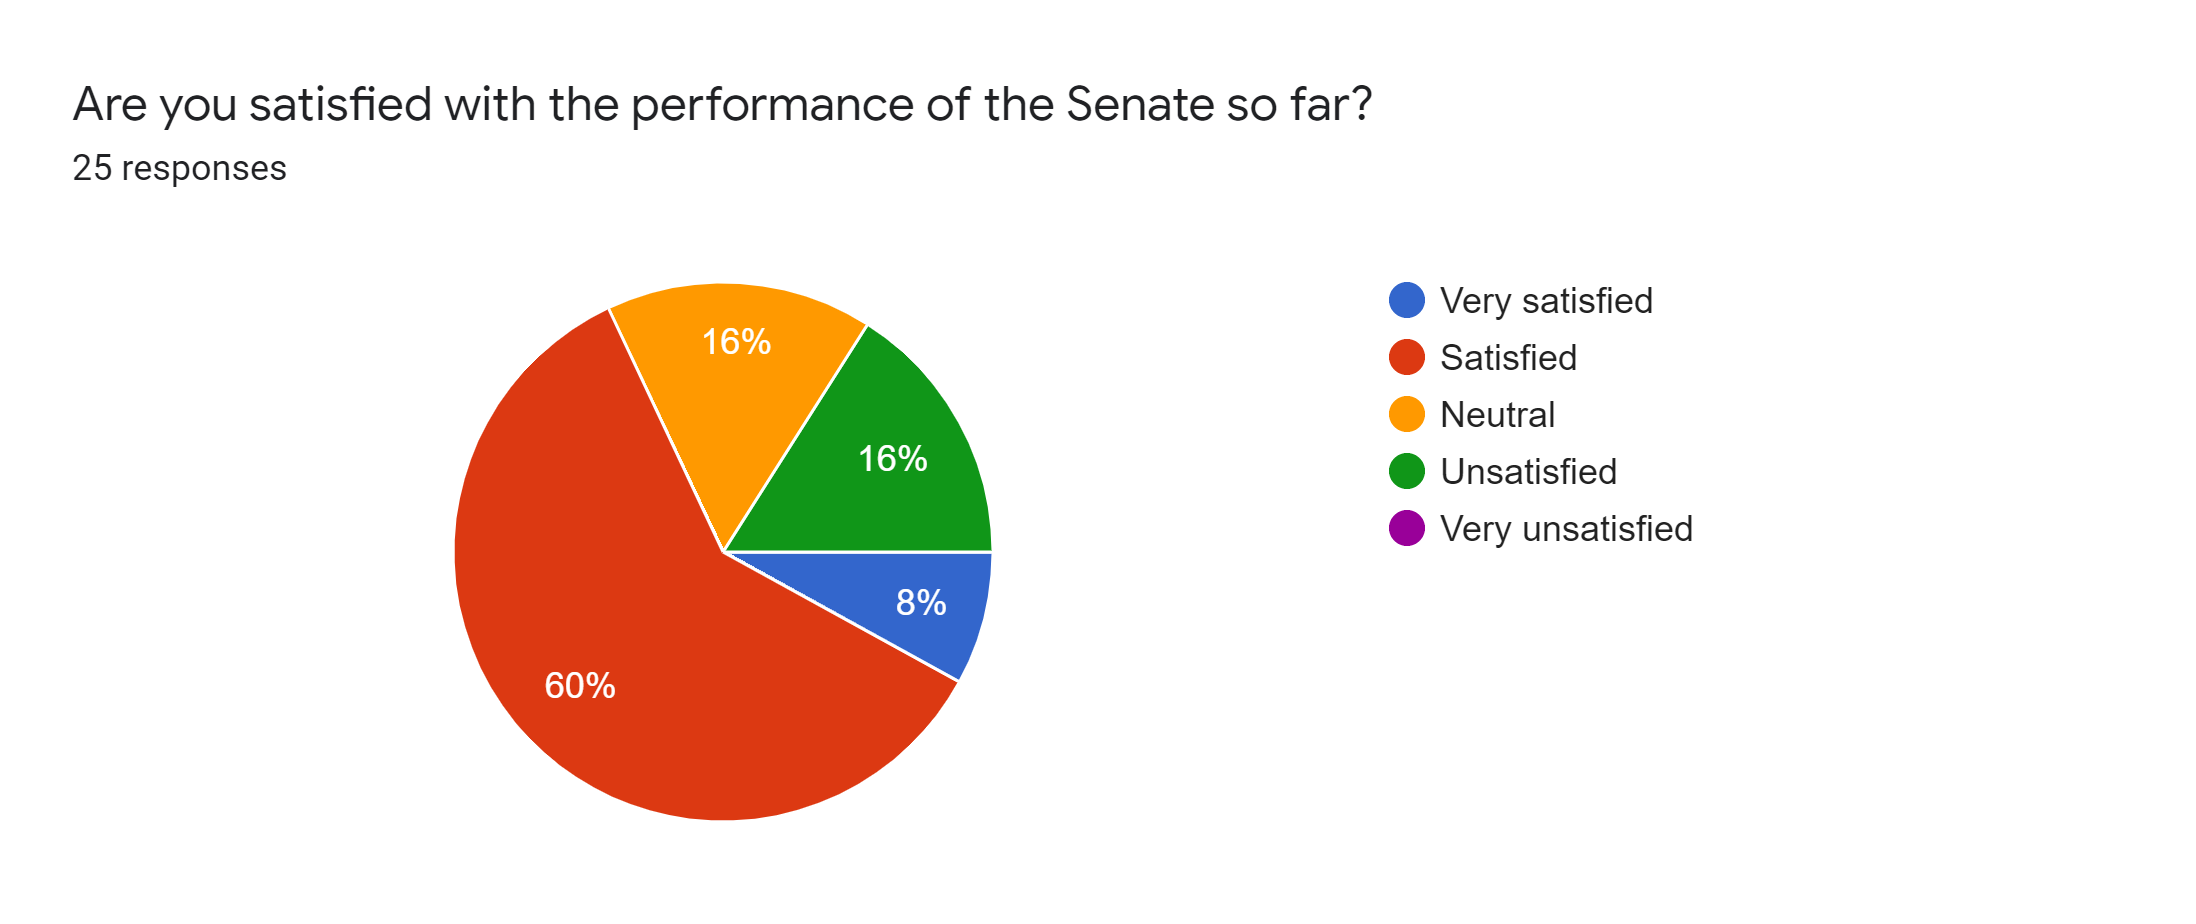 Forms response chart. Question title: Are you satisfied with the performance of the Senate so far?. Number of responses: 25 responses.